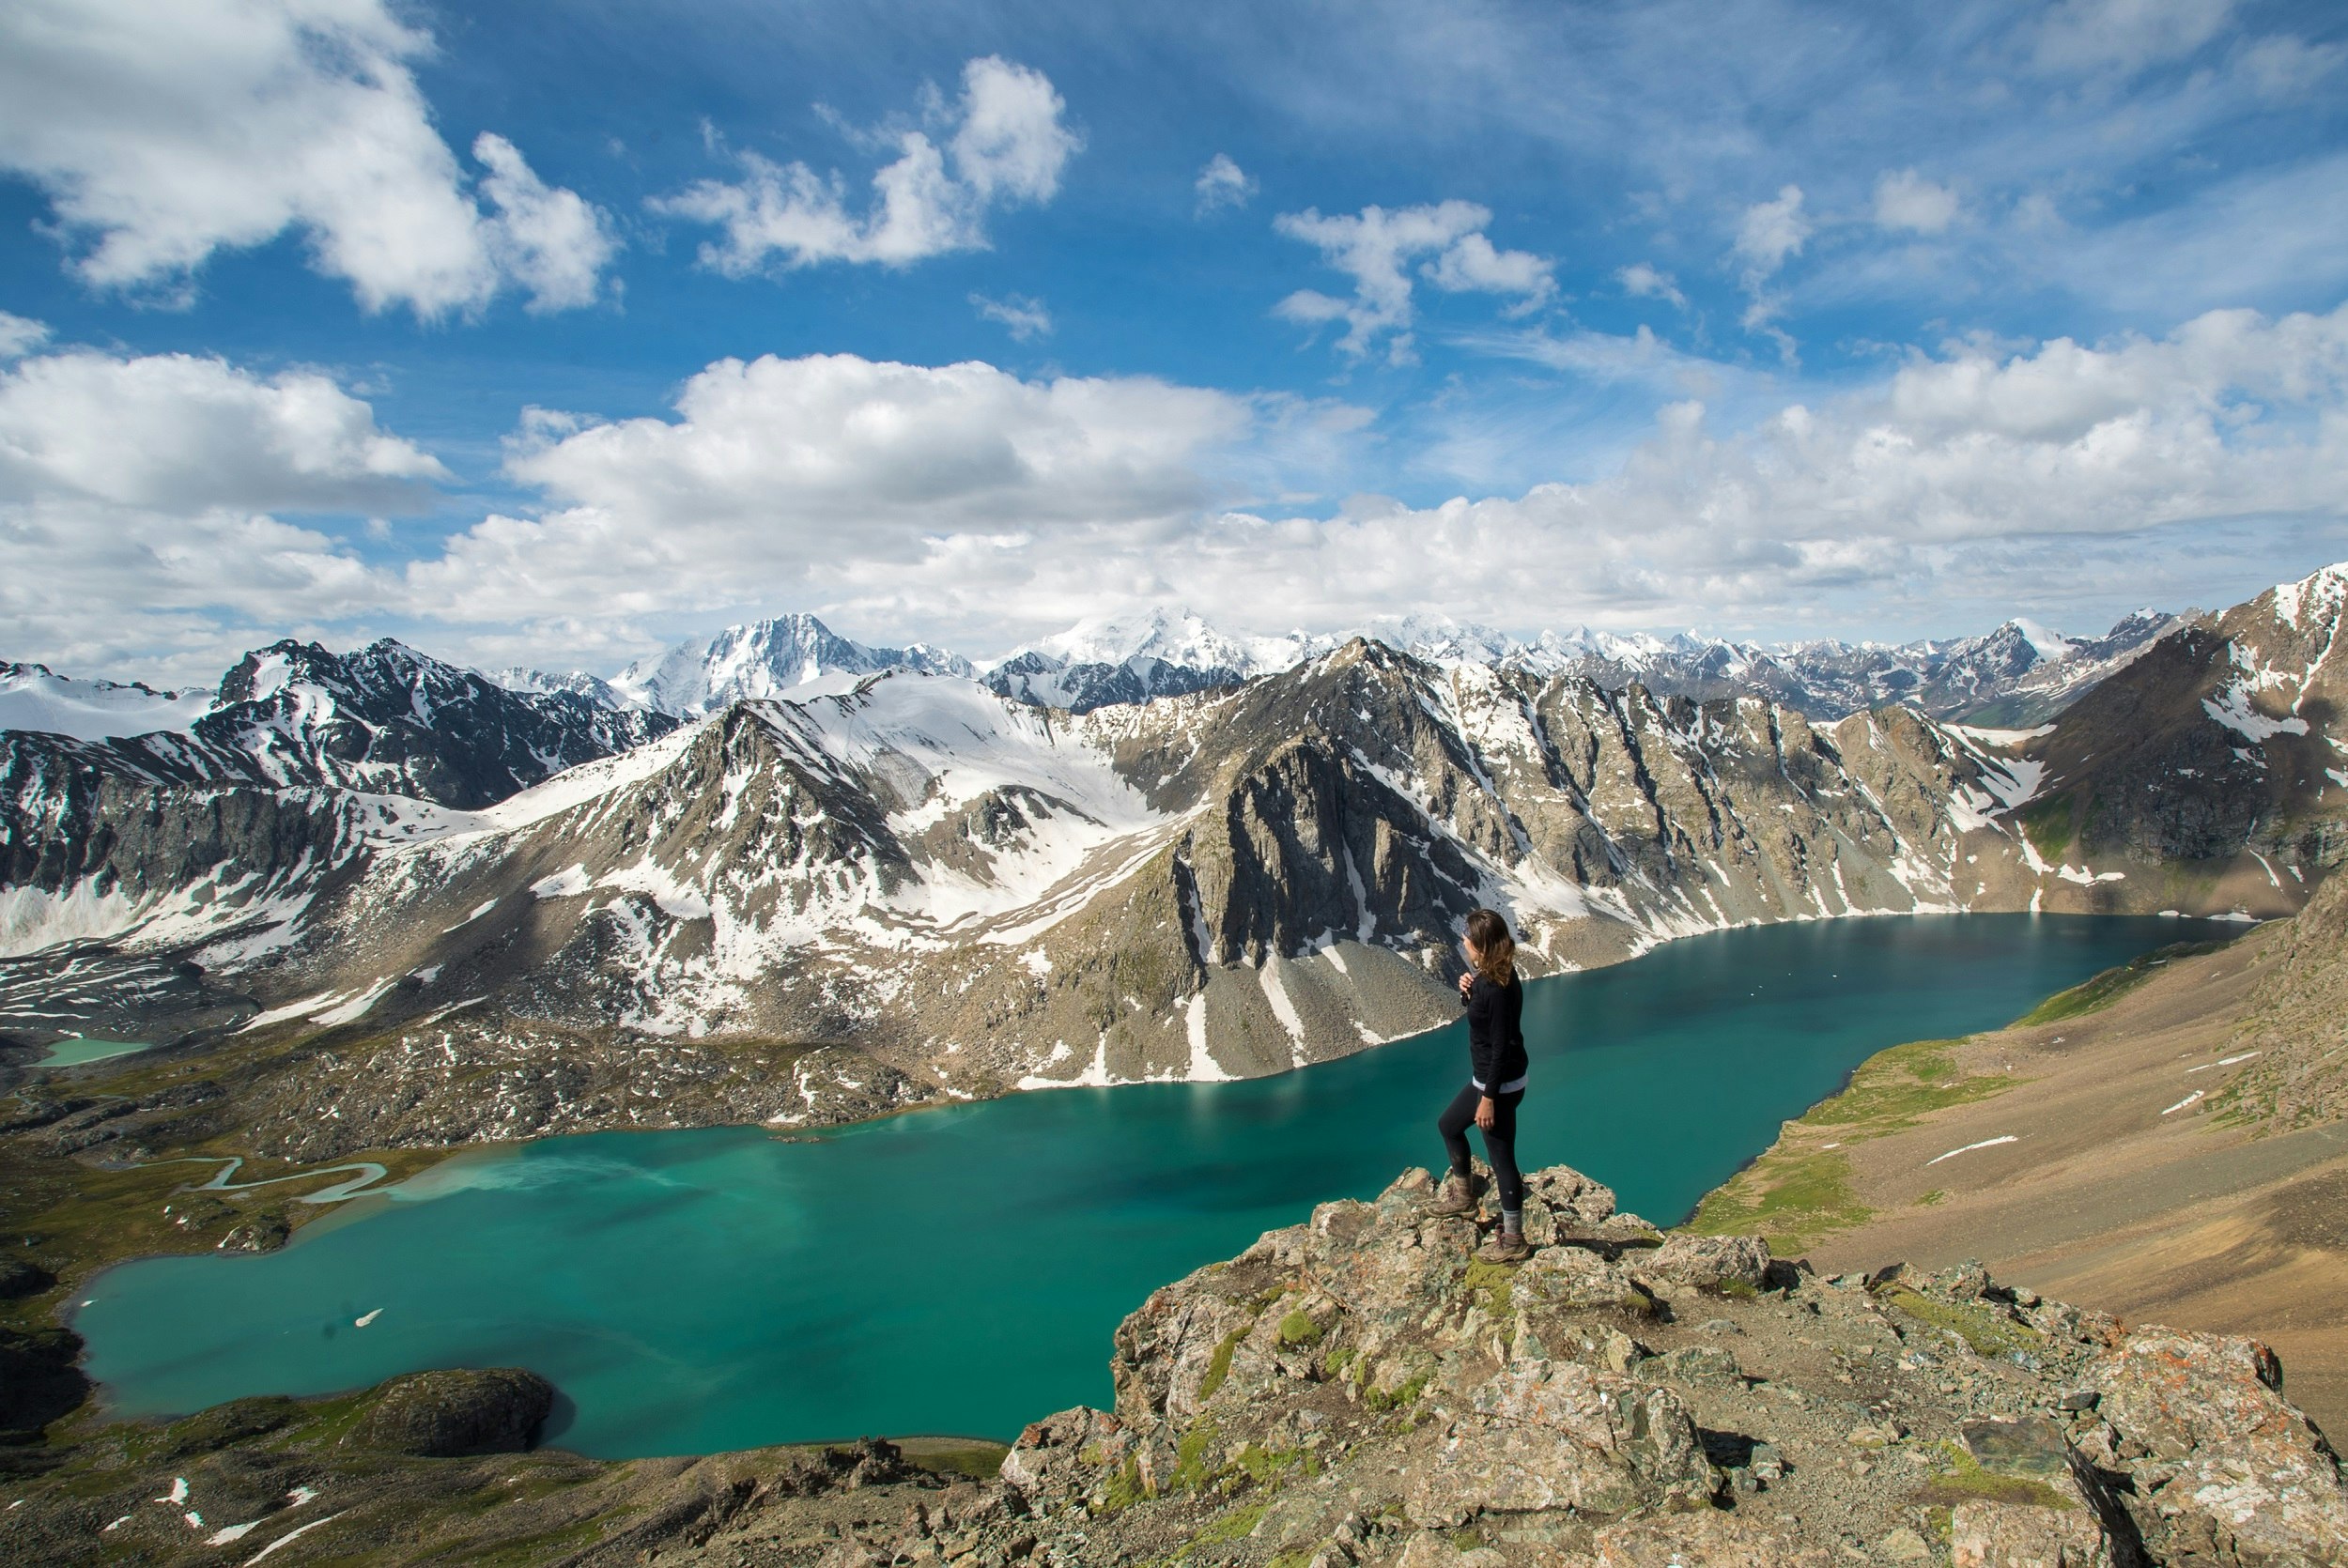 A solo woman stands on a mountaintop surrounded by snowy peaks, with a blue-green lake below.